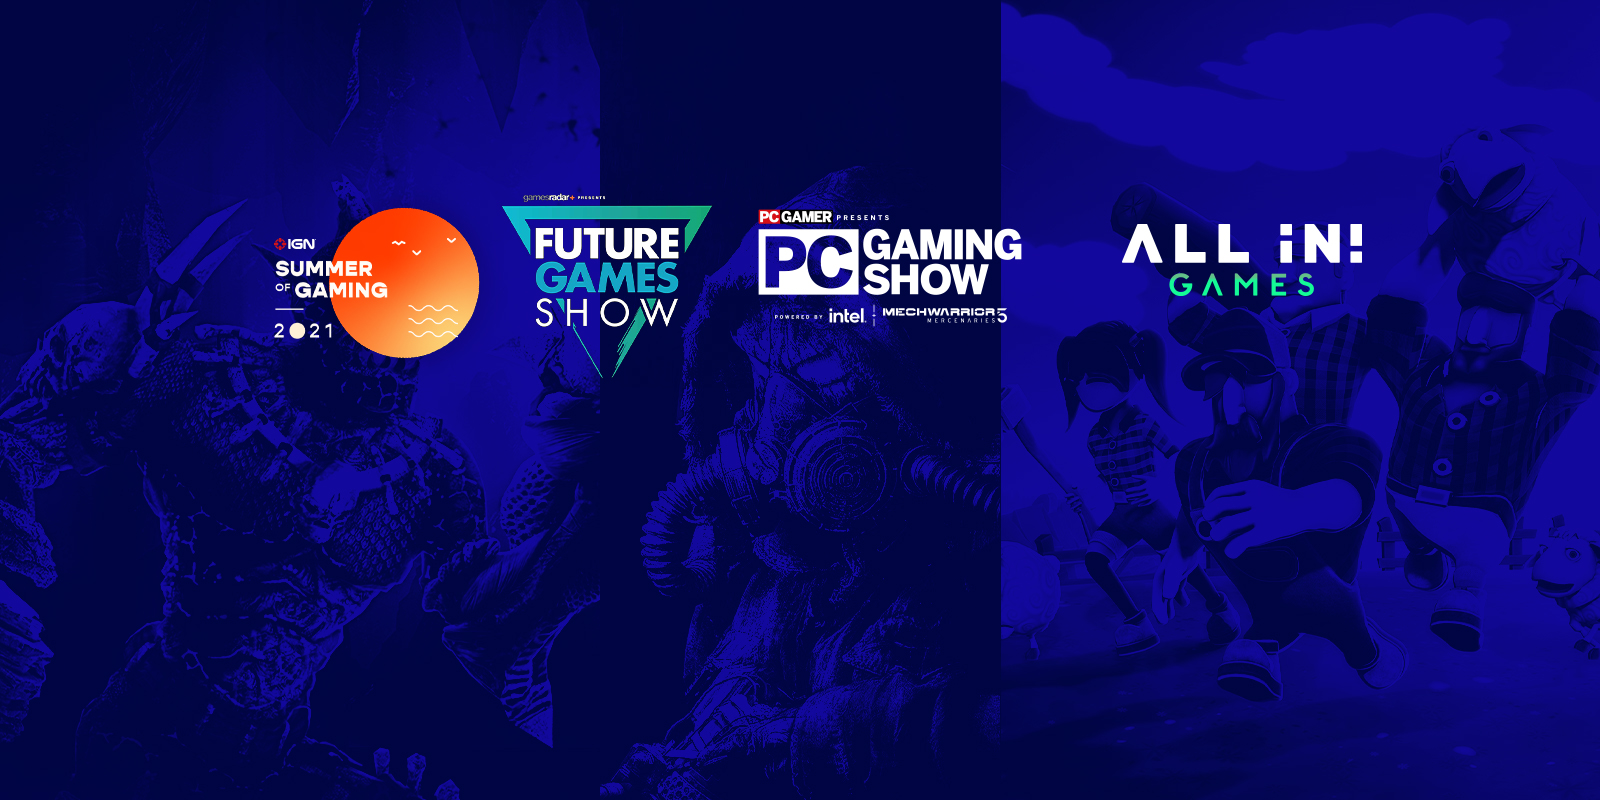 All in! Games at E3 PC Gaming Show IGN's Summer of Gaming and Future Games Show